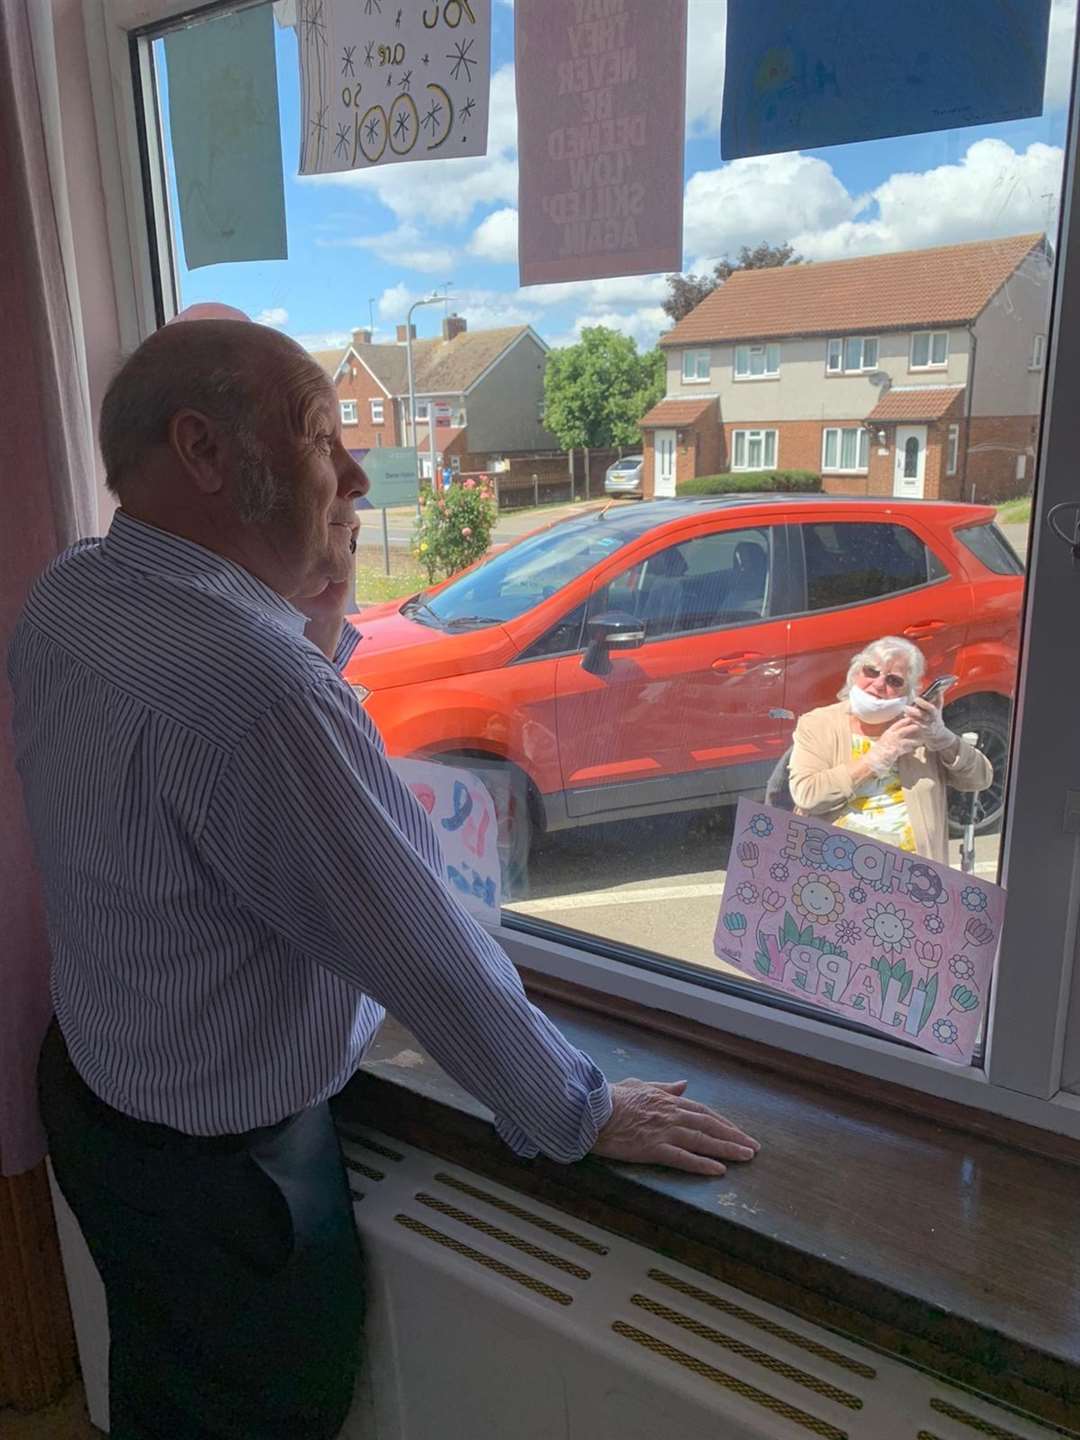 Stan was over the moon to receive a window visit from his wife and daughter